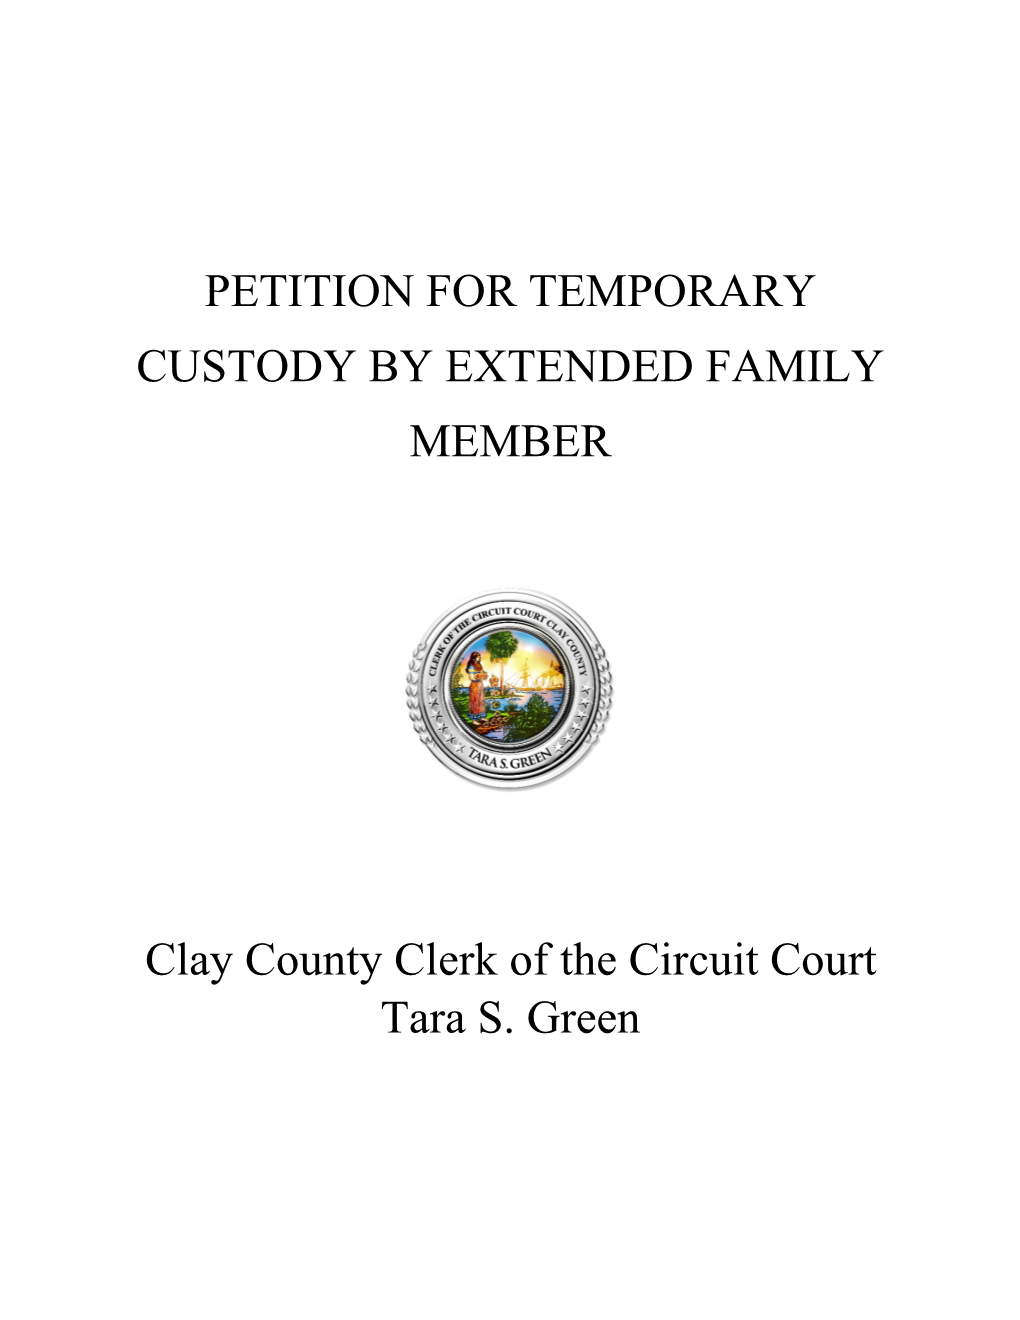 Petition for Temporary Custody by Extended Family Member